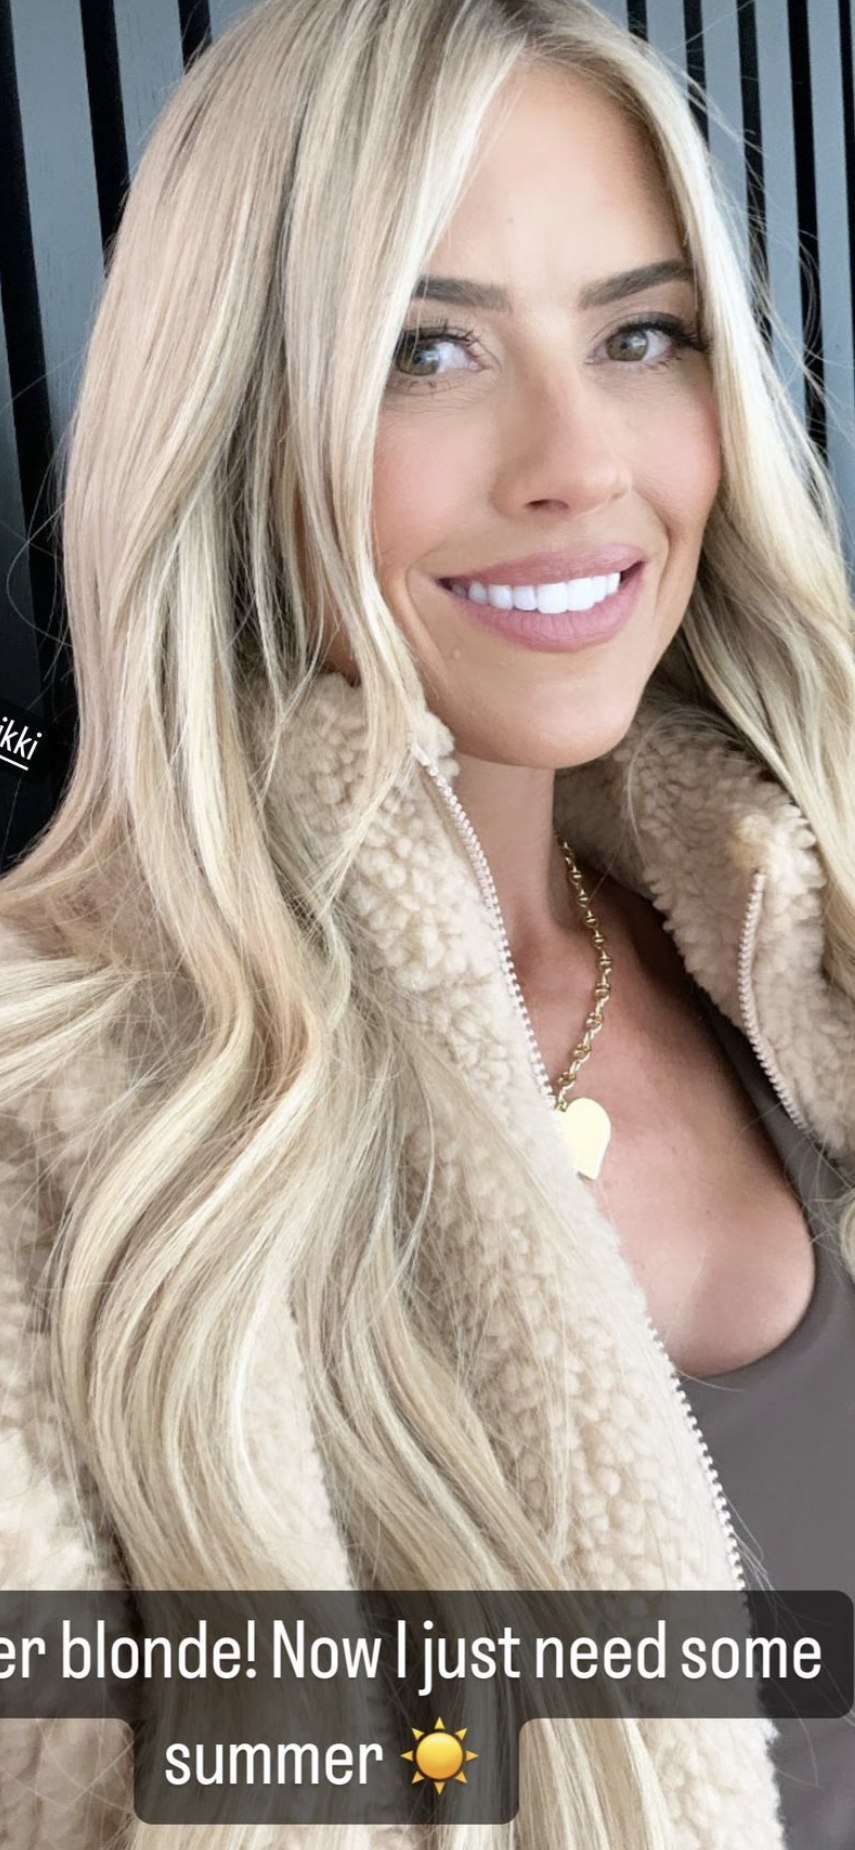 Christina Hall showed off her new hair on Instagram